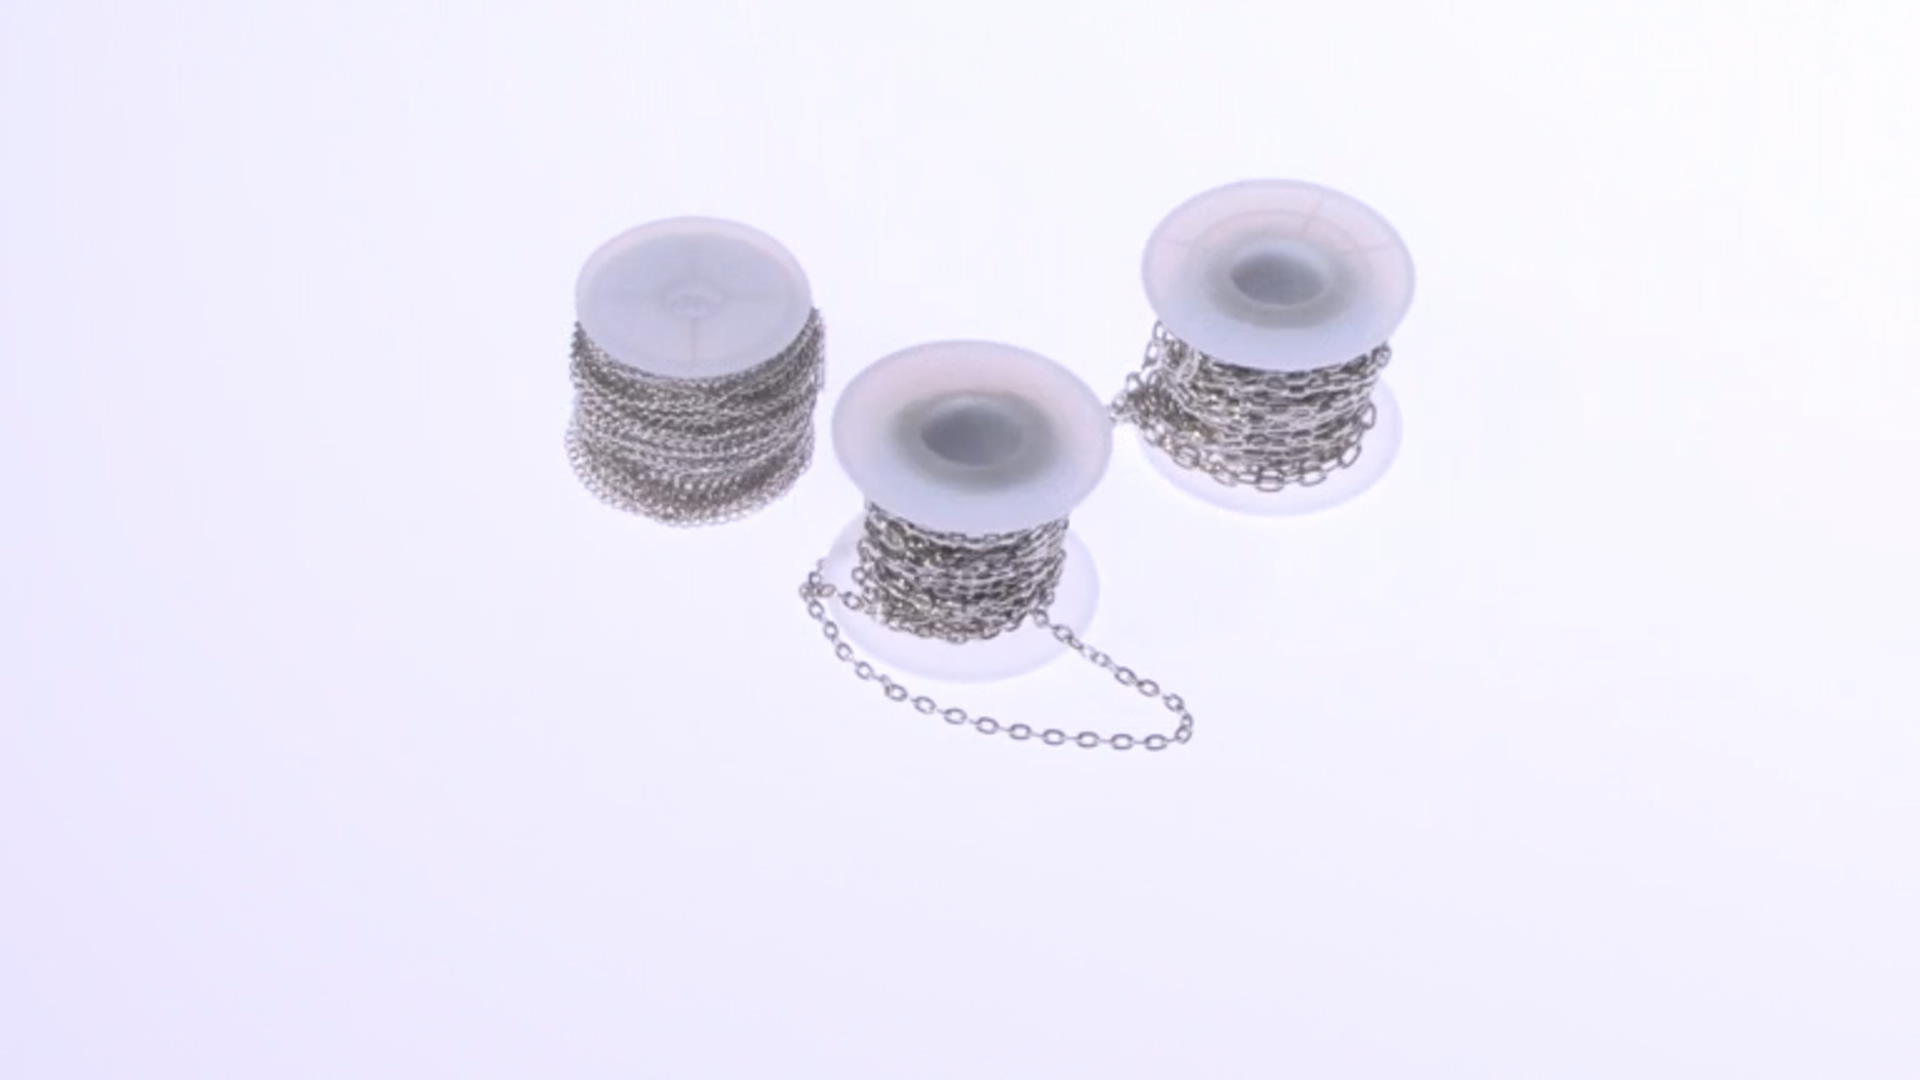 Assorted Chain Set of 3 in Silver Tone appx 15 Meters Total Video Thumbnail